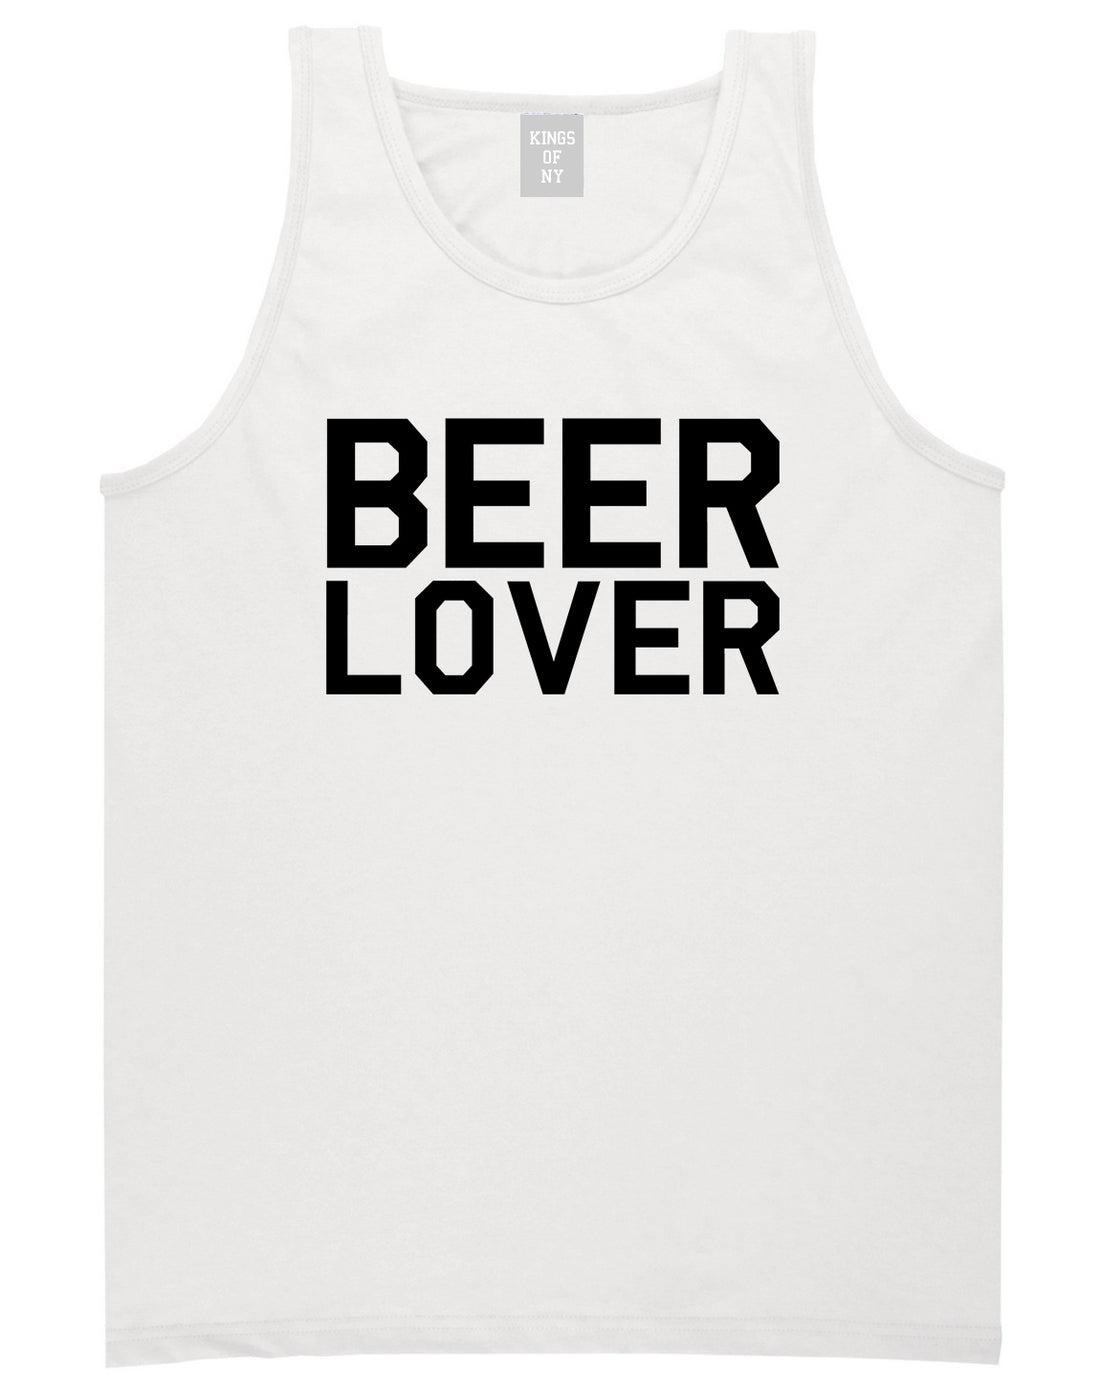 Beer_Lover_Drinking Mens White Tank Top Shirt by Kings Of NY